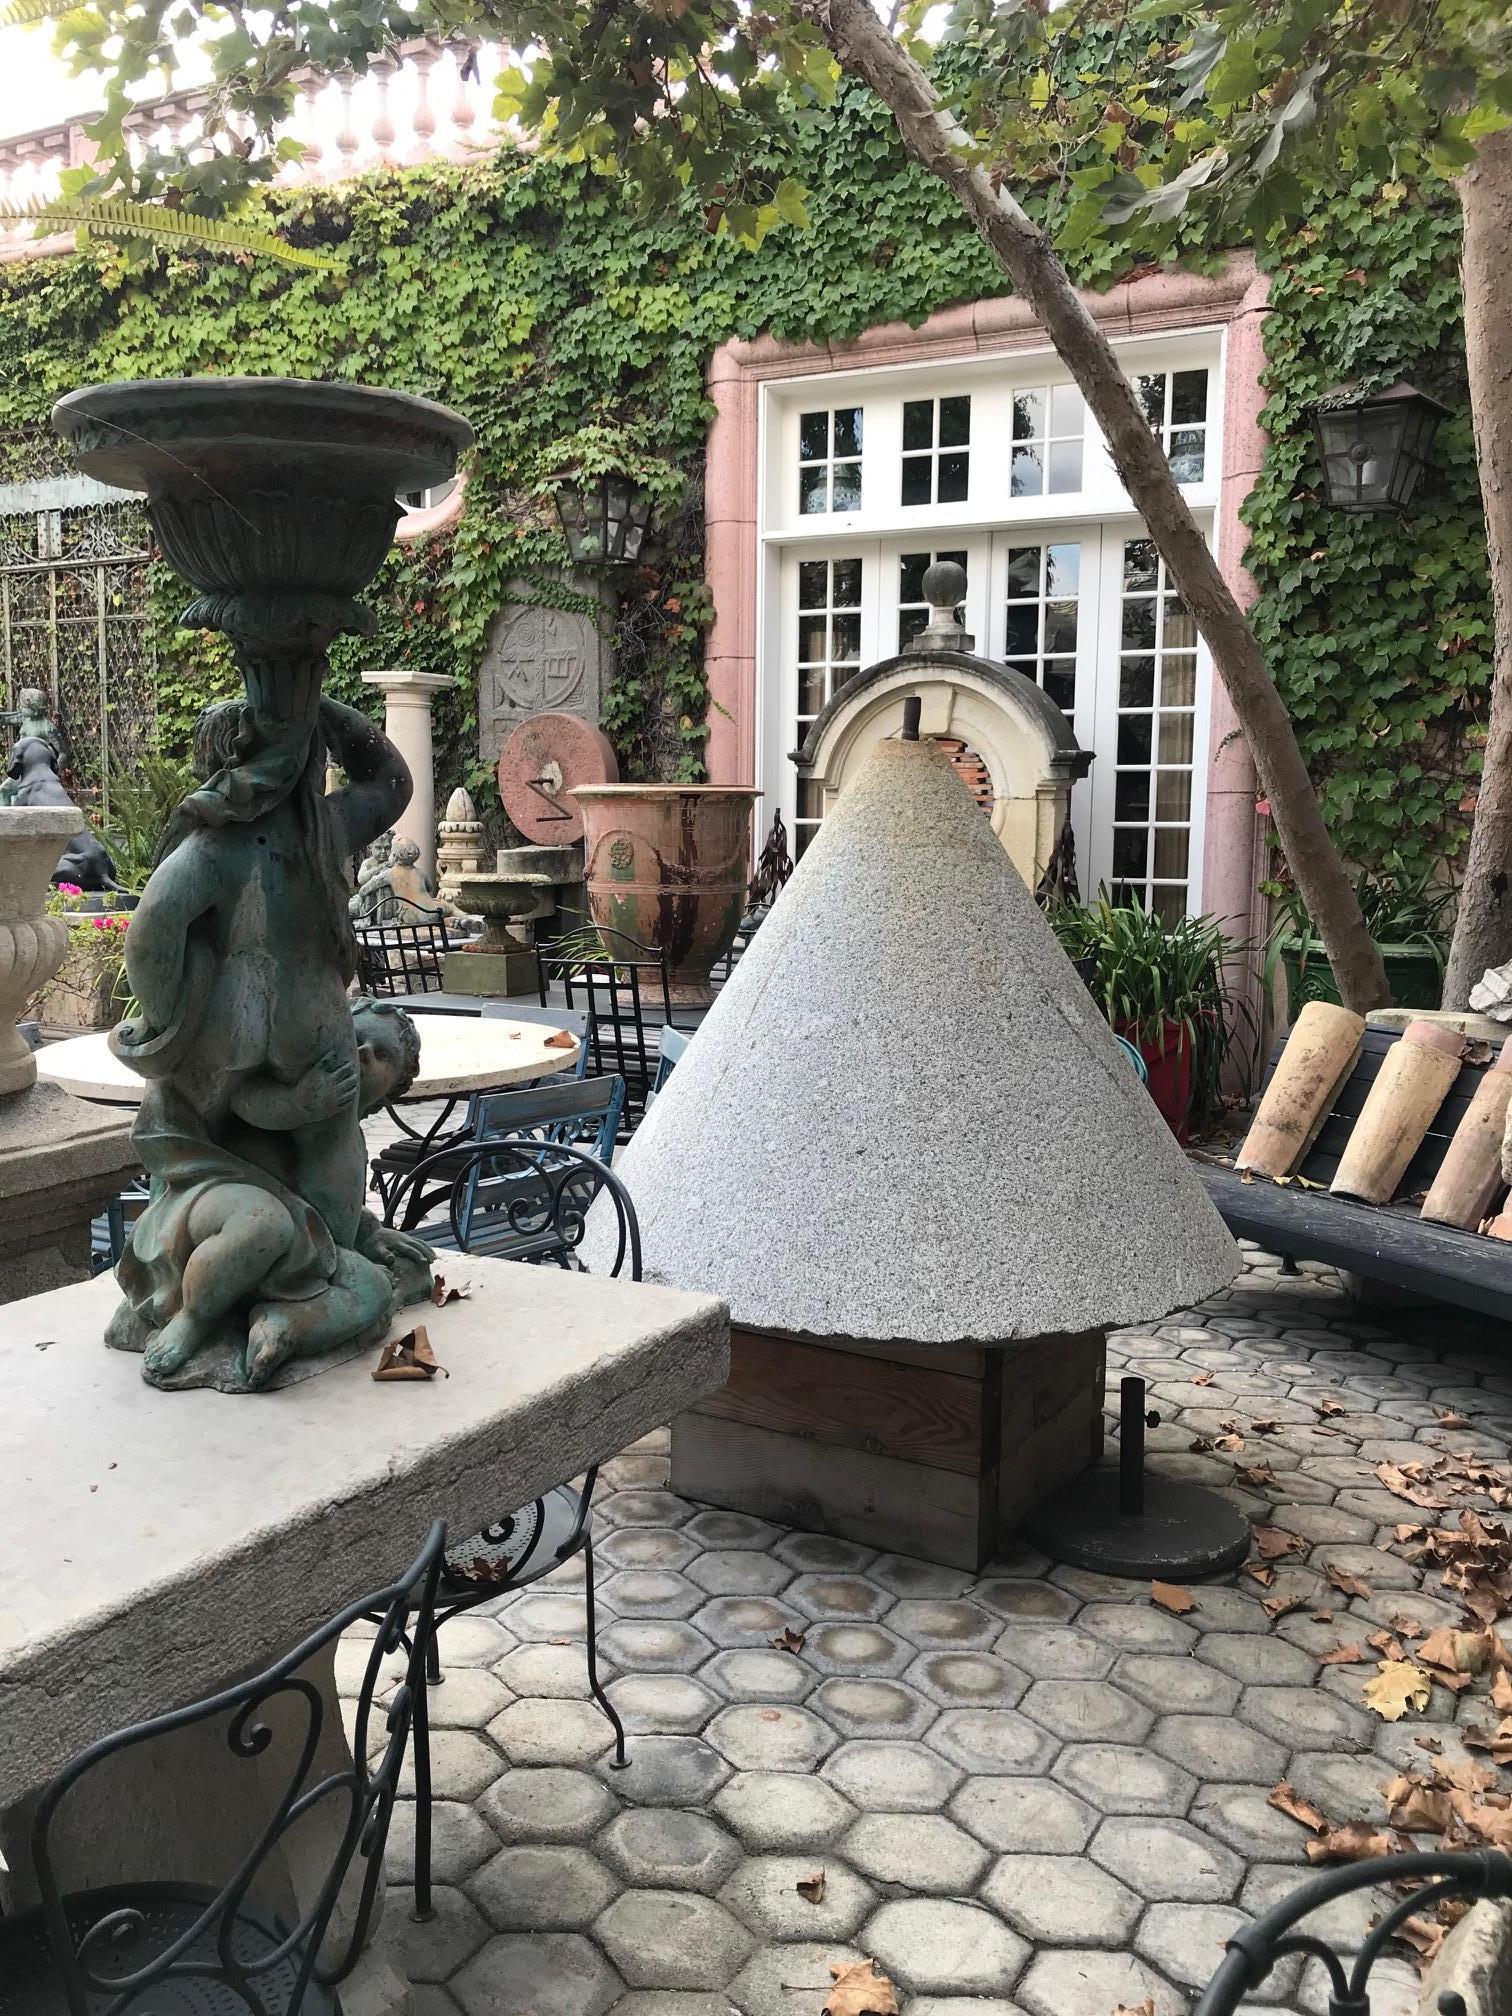 Very Large historic Olive press granite cone weighs approximately about 6000 Lbs each . 19th Century from Spain Cataluña . We have a total of 3 Cones architectural elements huge olive press from spain 
From side to side it’s 139” basin width if